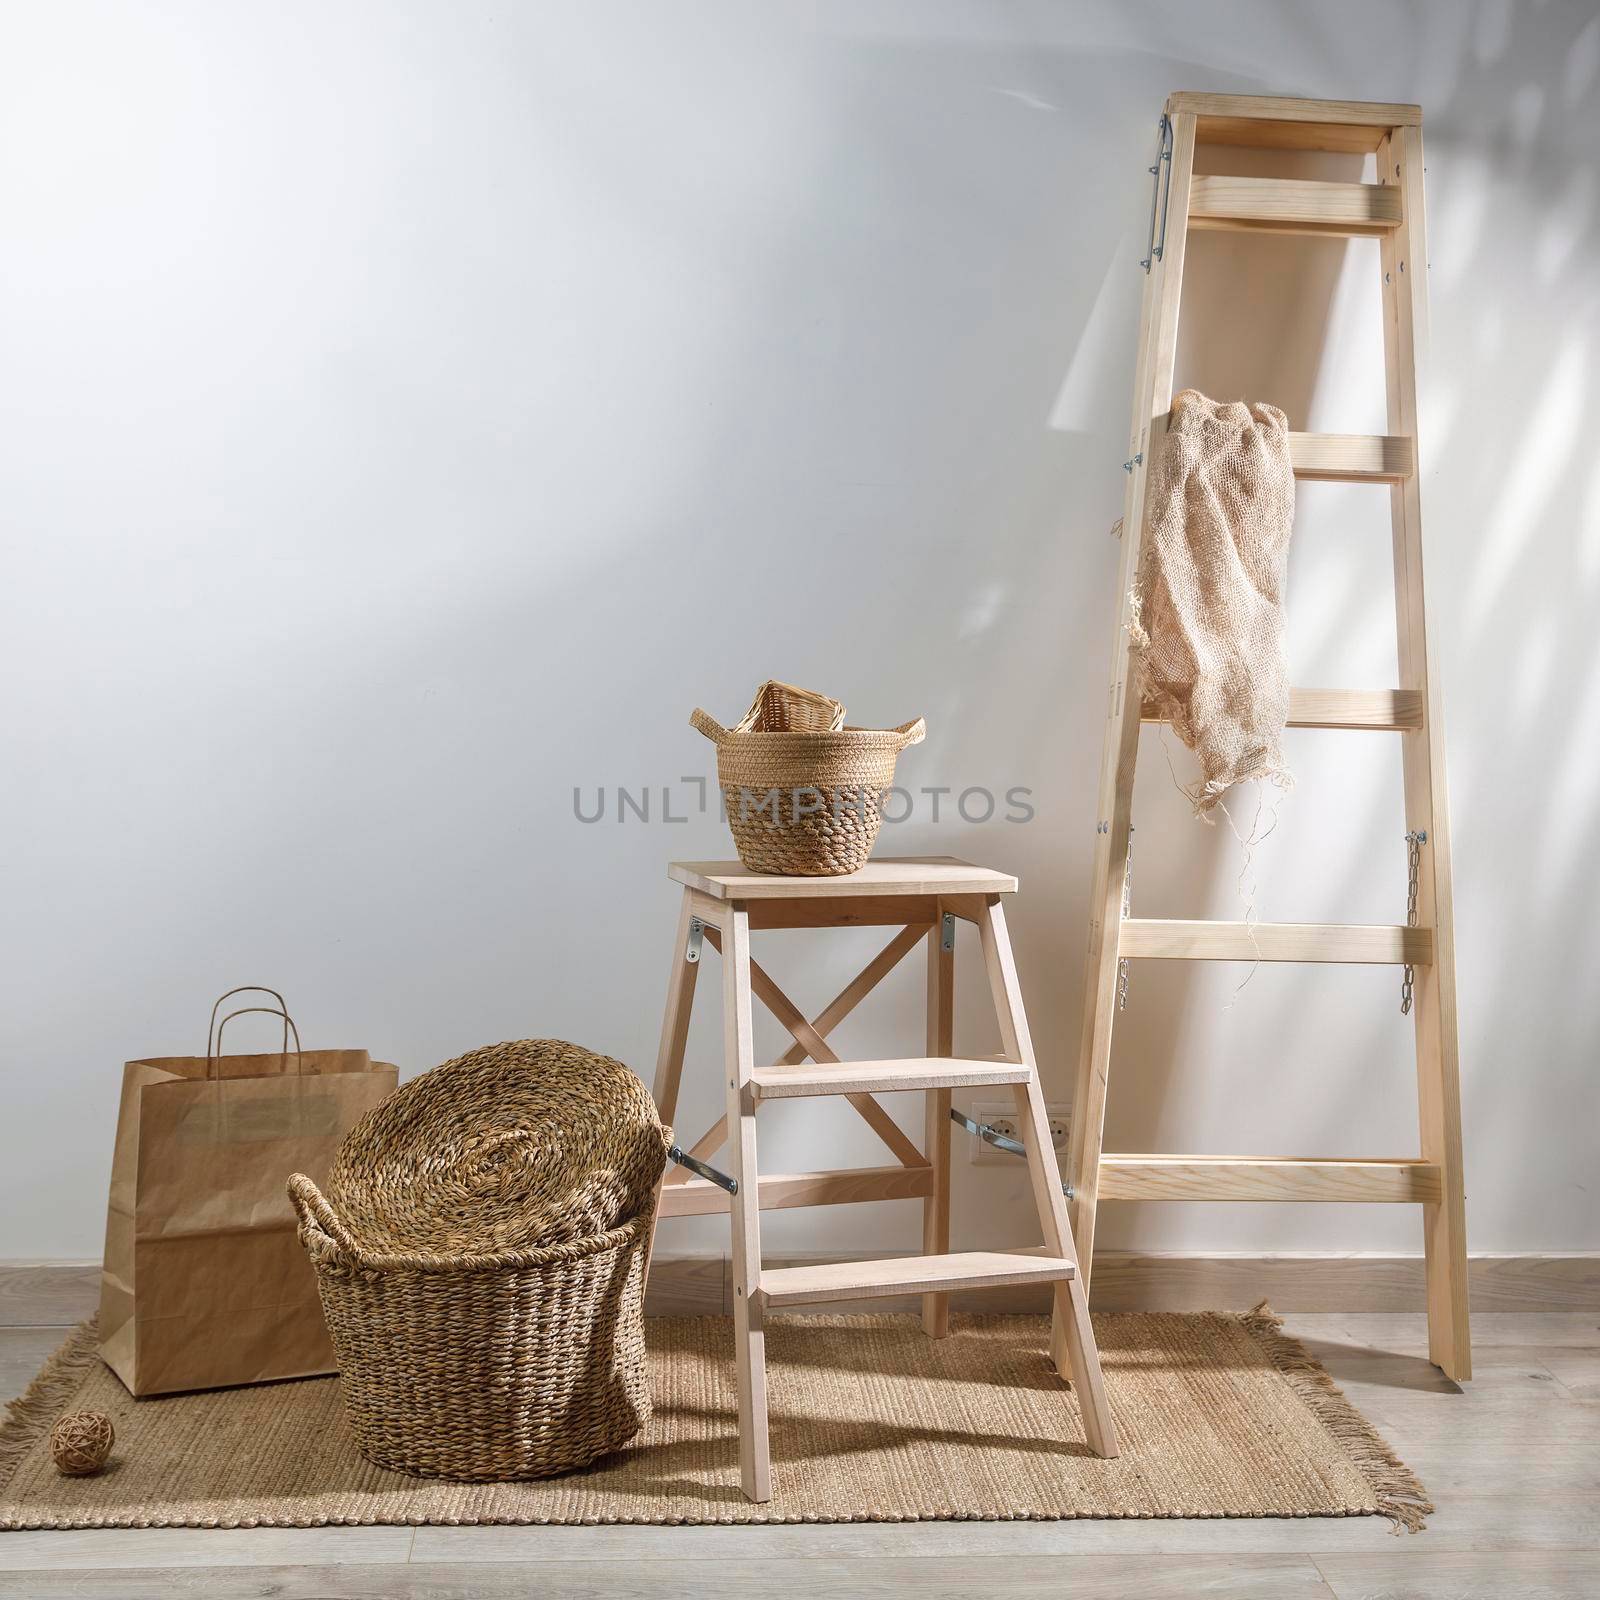 Storage room. Wooden stairs, wicker baskets on a mat. Copy space. Place for text. Copy space